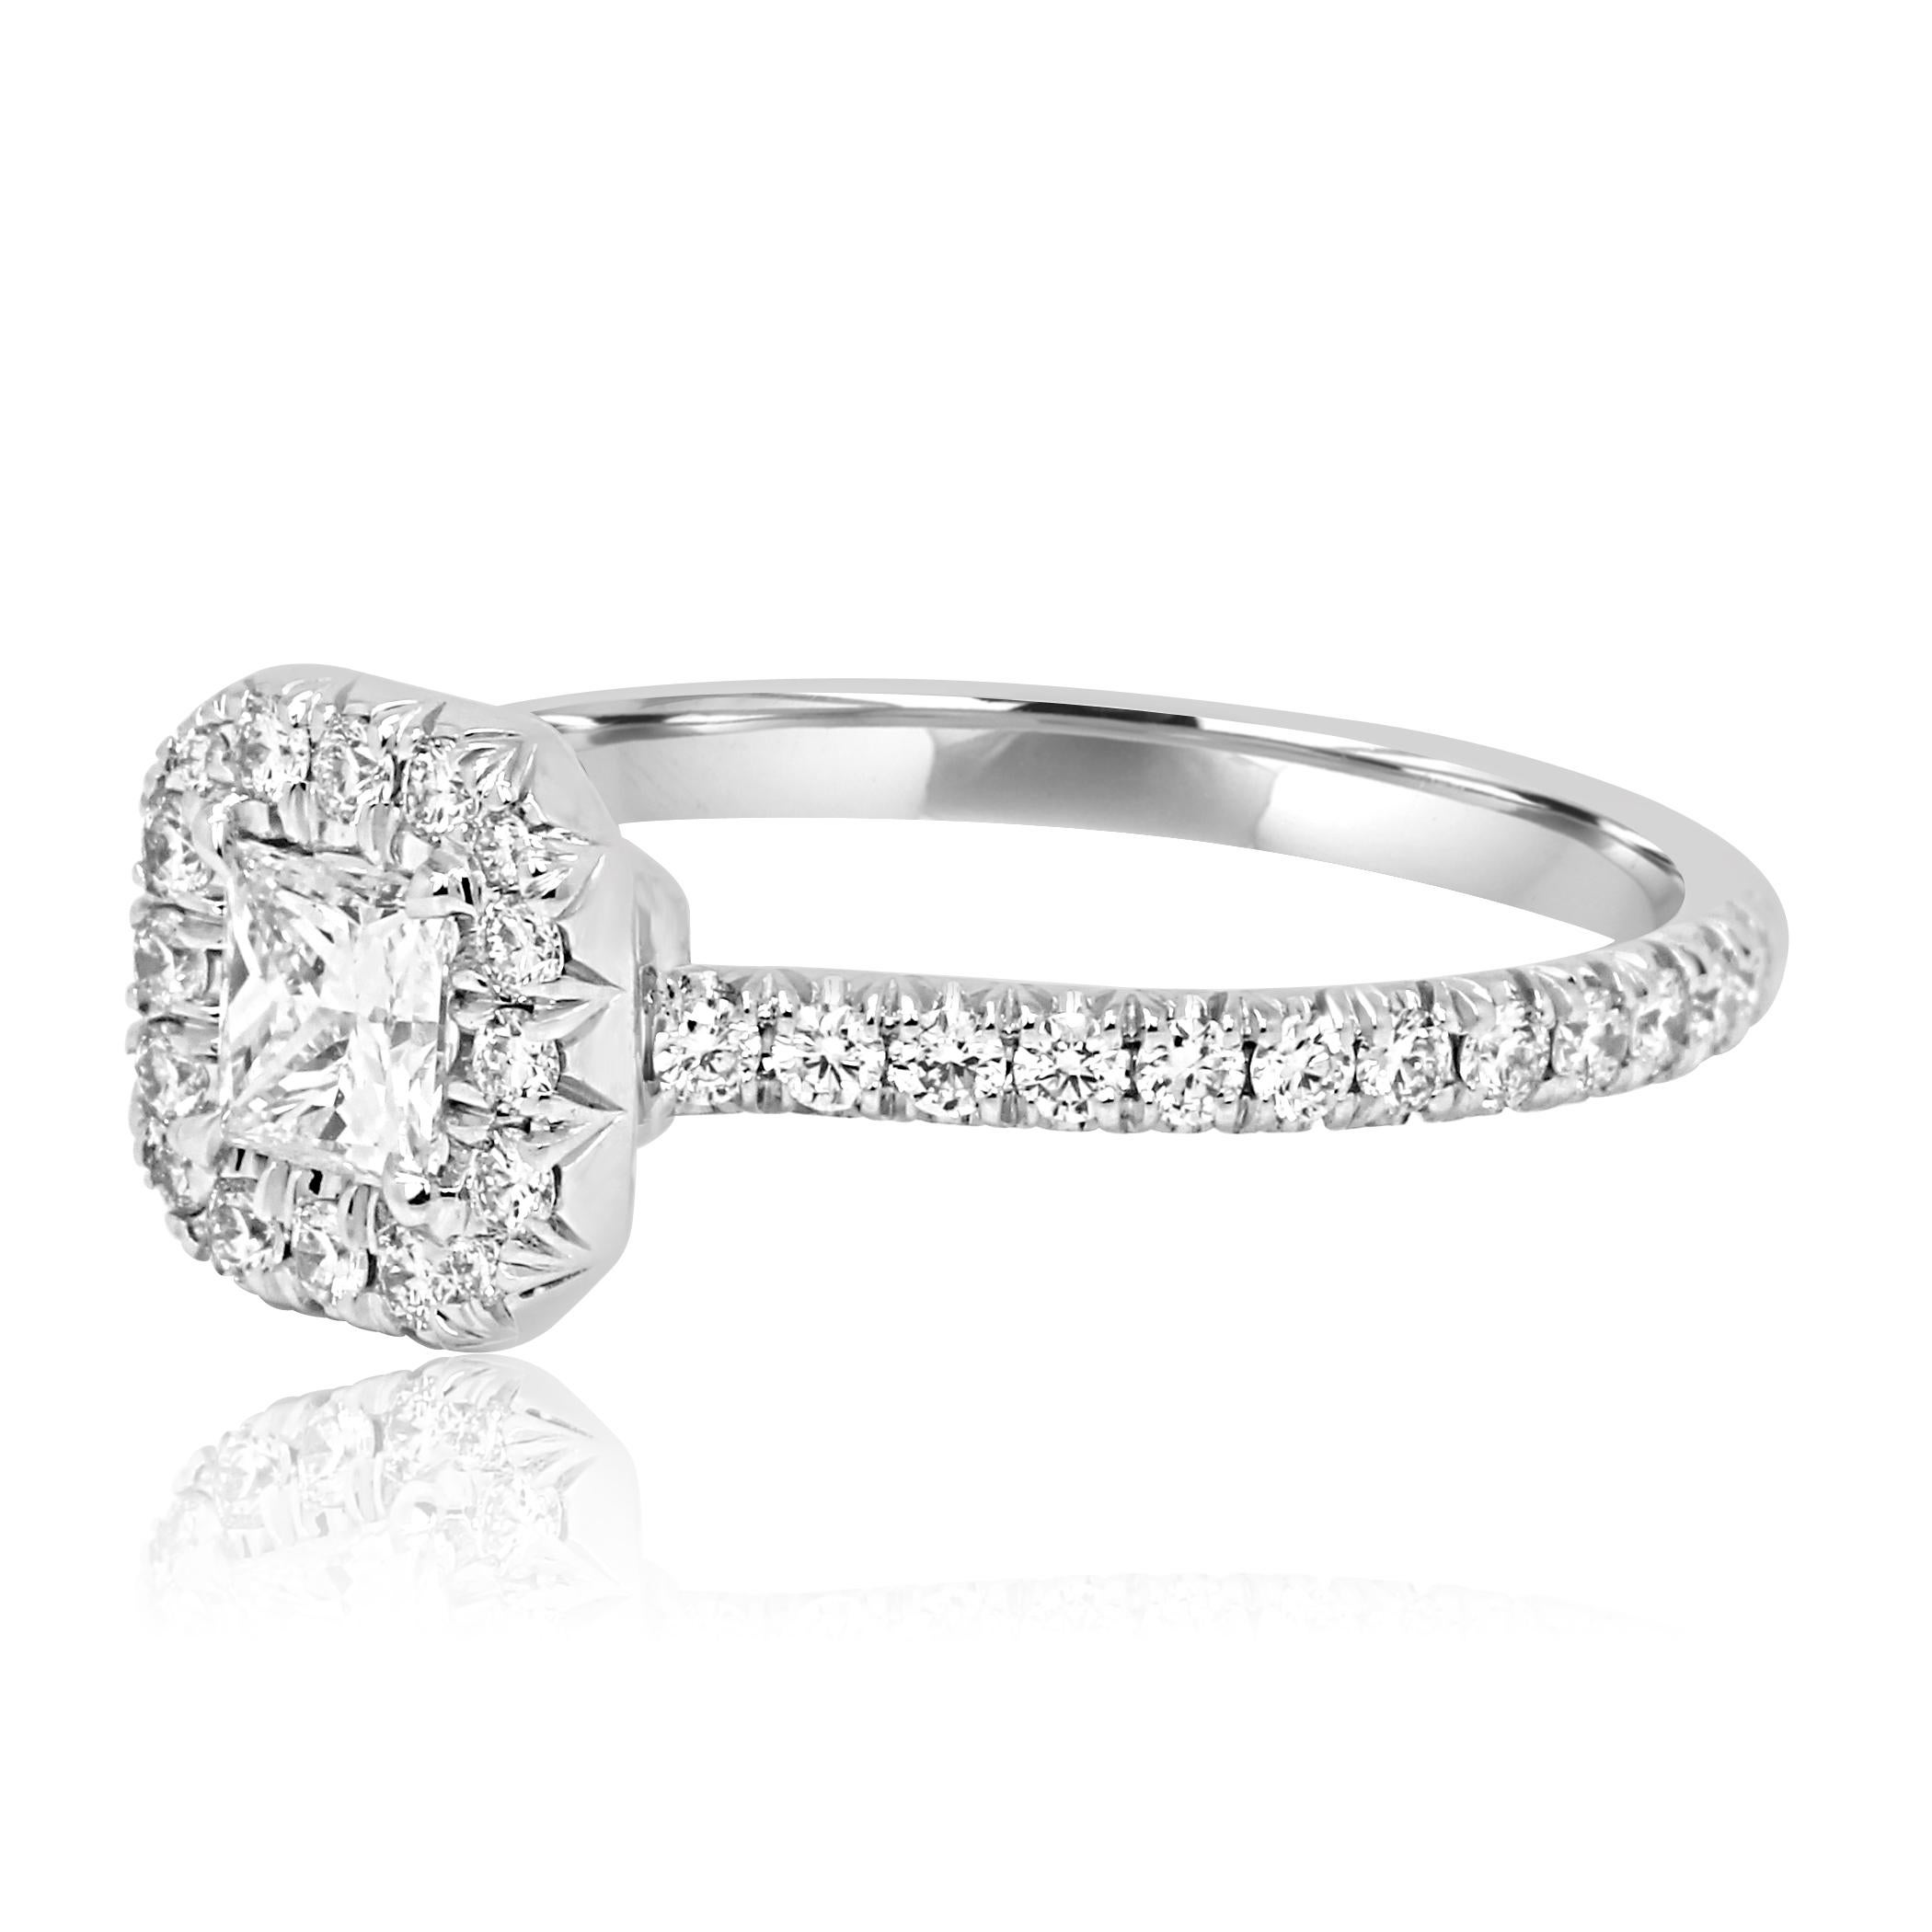 GIA Certified Princess Cut E color SI2 Clarity 0.43 Carat Encircled in a Halo of 42 White G-H color Diamond Rounds VS-SI Clarity 0.50 Carat set in 18K White Gold Classic Halo Engagement Ring.

Total Diamond Weight 0.93 Carat
Matching Band